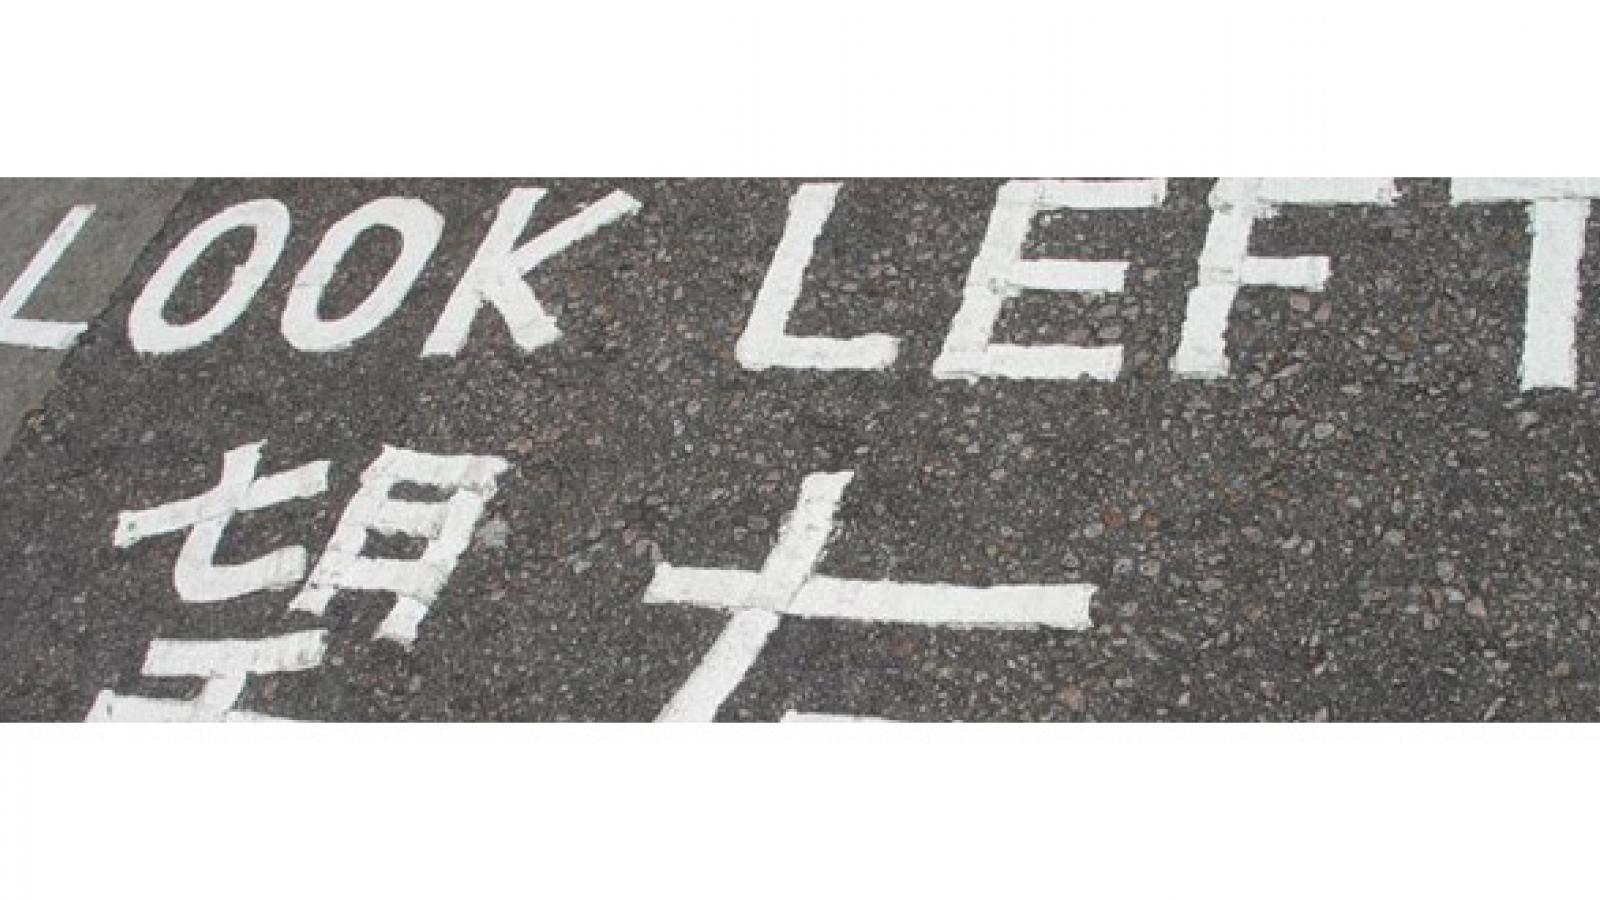 The words Look Left painted on a road in two languages.